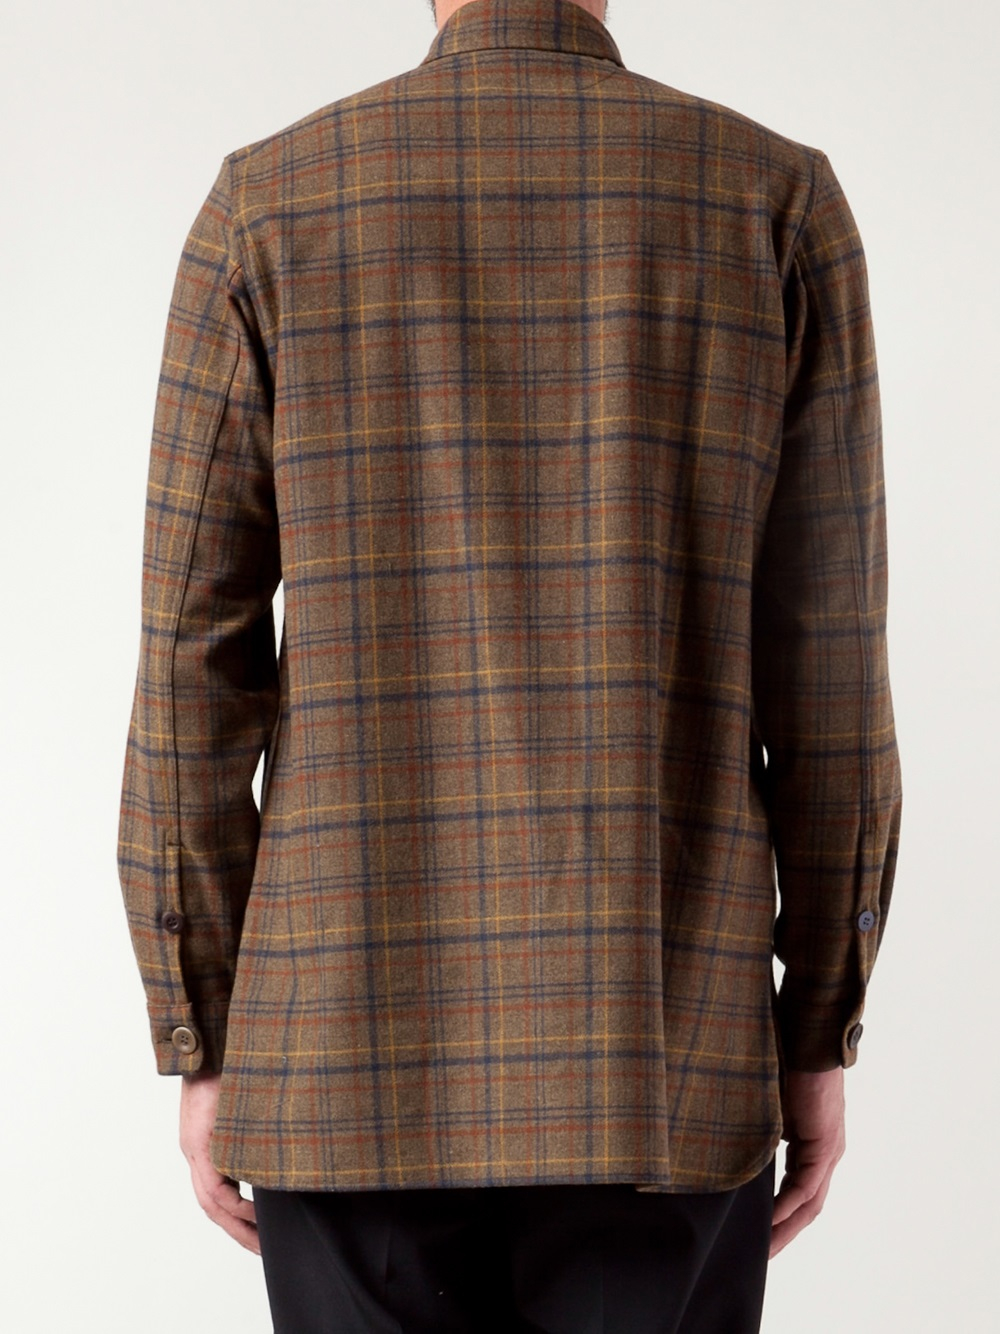 Lyst - Undercover Plaid Pattern Shirt in Brown for Men